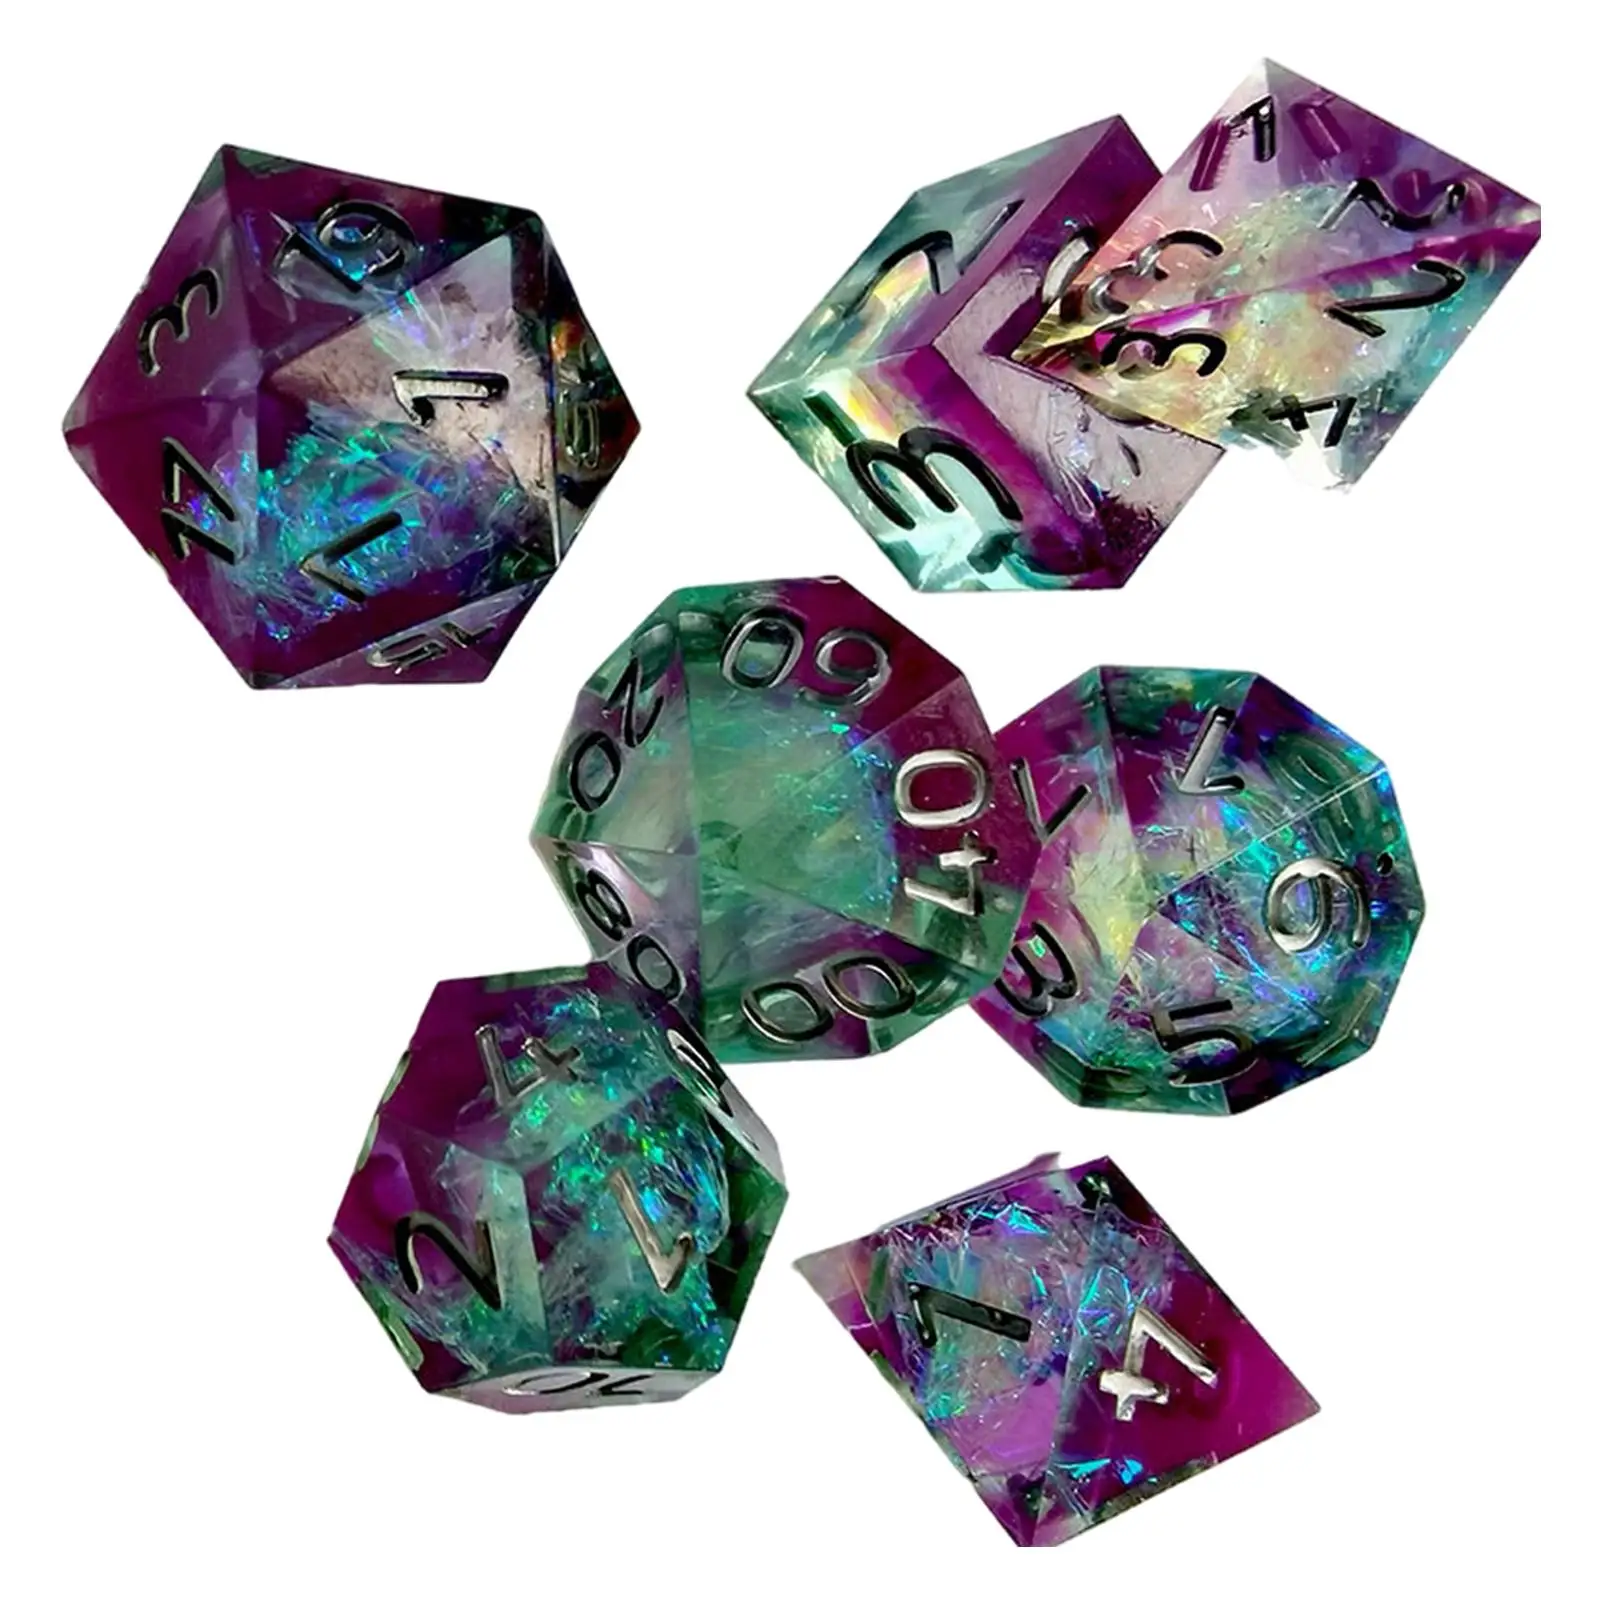 Polyhedral Dice D4 D6 D8 2XD10 D12 D20 with Sharp Edges Beautiful Inclusions for 